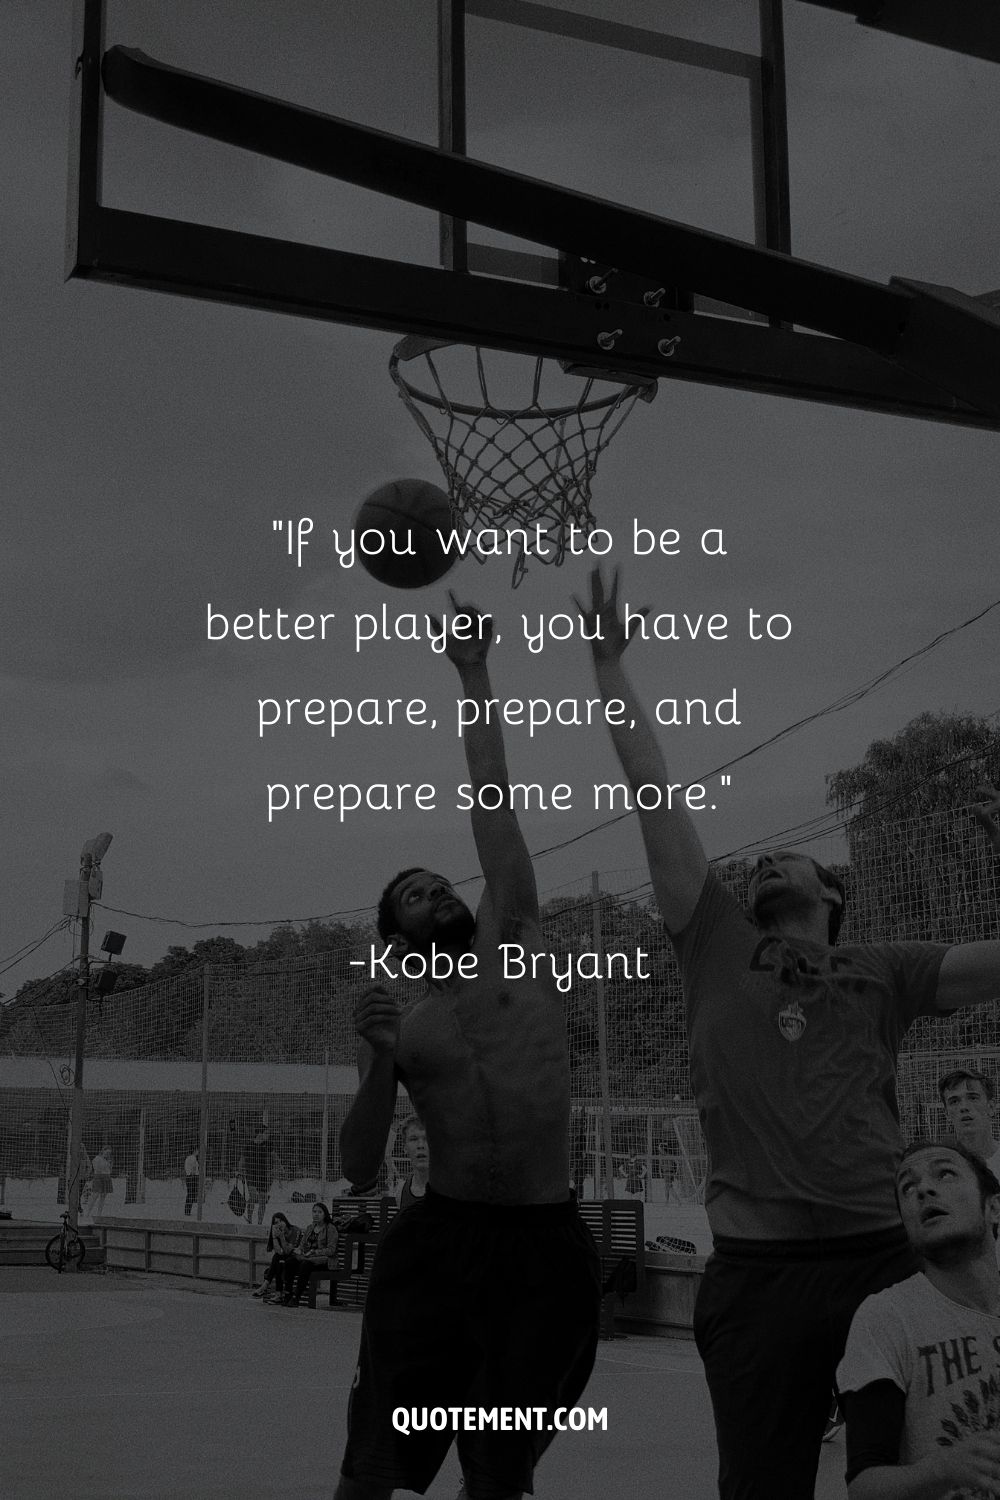 Hoops under the open sky representing a preparation quote.
